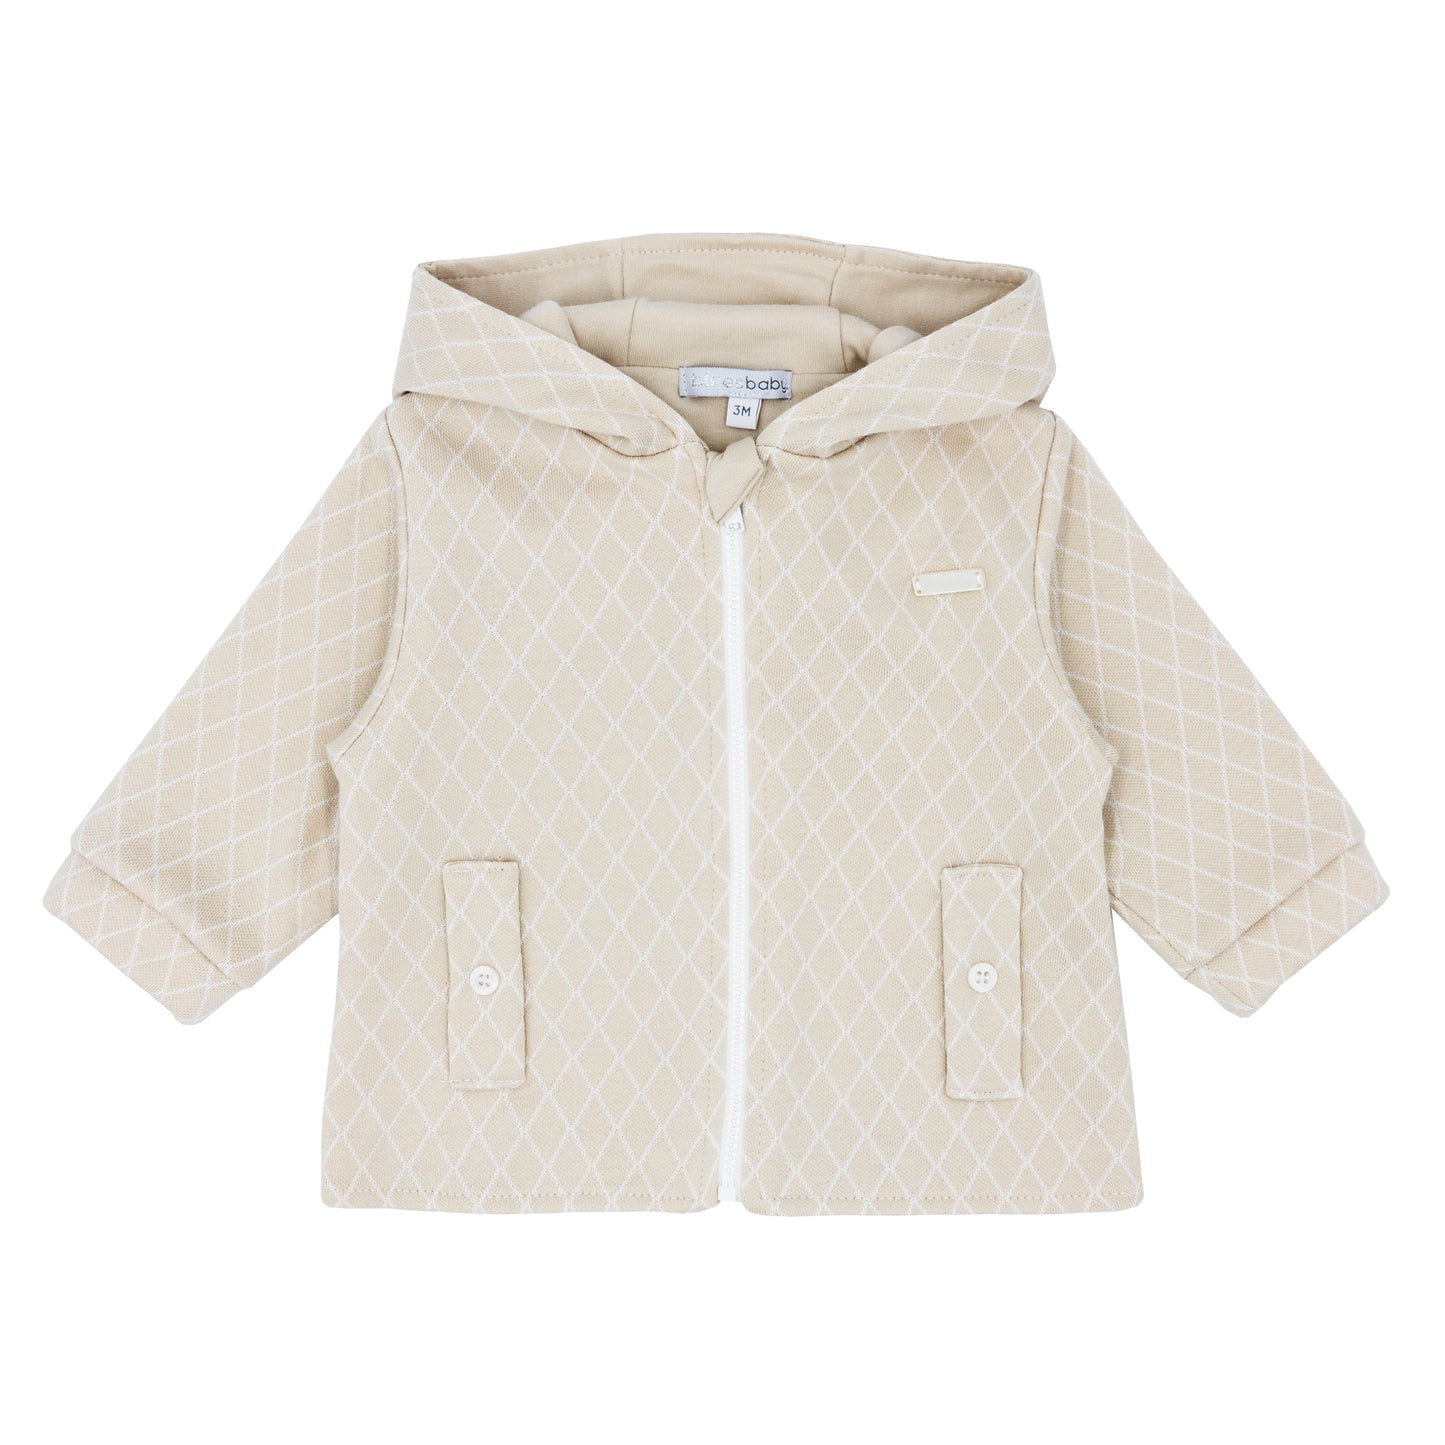 Blues Baby Boys Milan Collection Stone Jacket